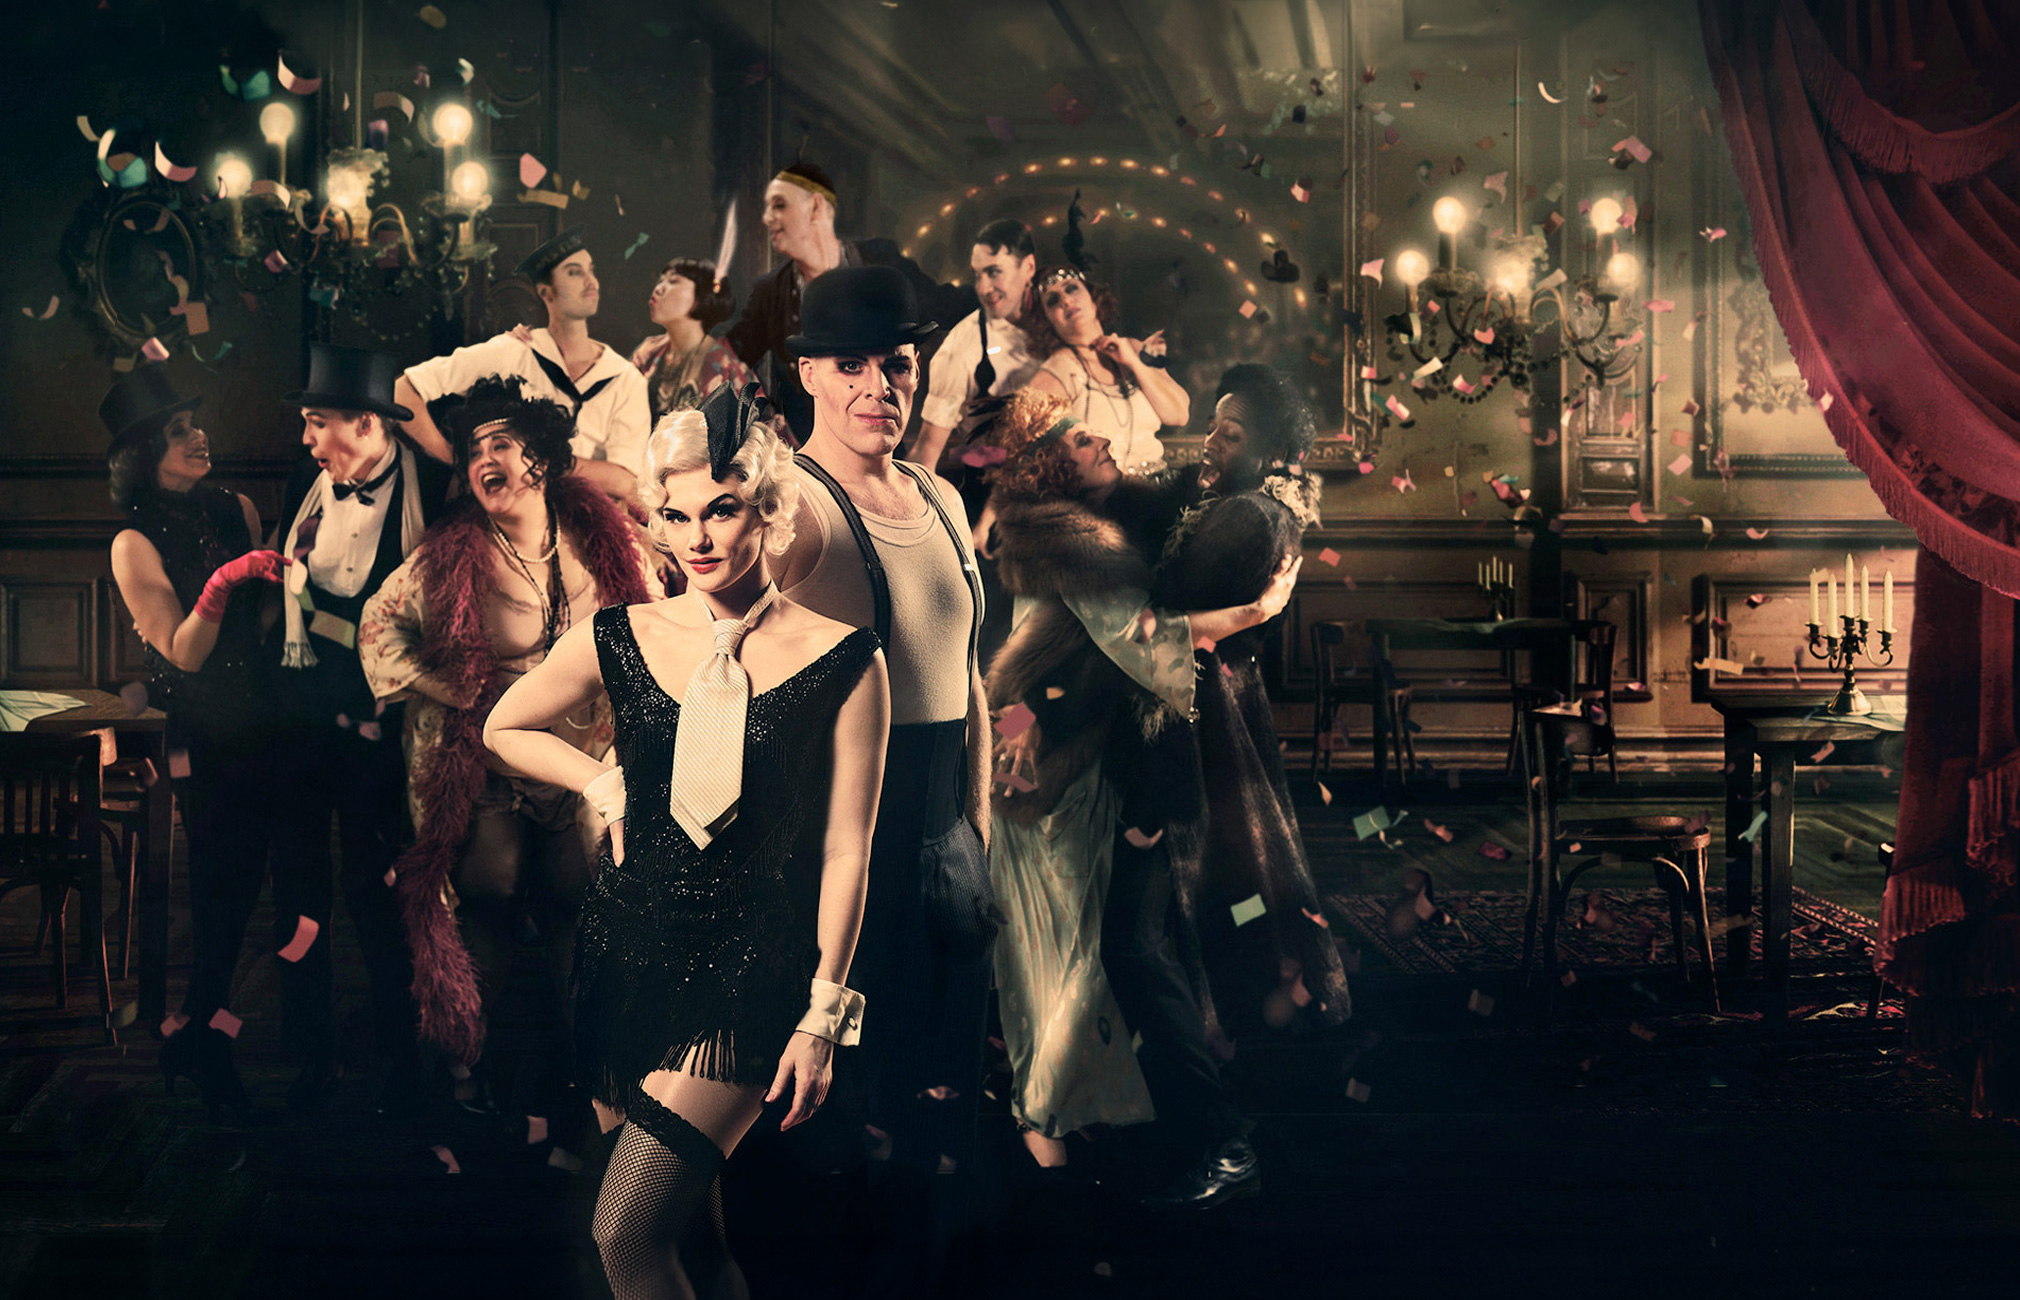 A group of people is in a festive environment. They are dressed in clothes that suggest an earlier era, possibly the 1920s. The background is a richly decorated indoor setting with dark wood tones and red draperies. Chandeliers and other light sources give the image a warm tone. The people seem to be engaged in dance or other festive activity, with flowers and other decorations visible in the background.